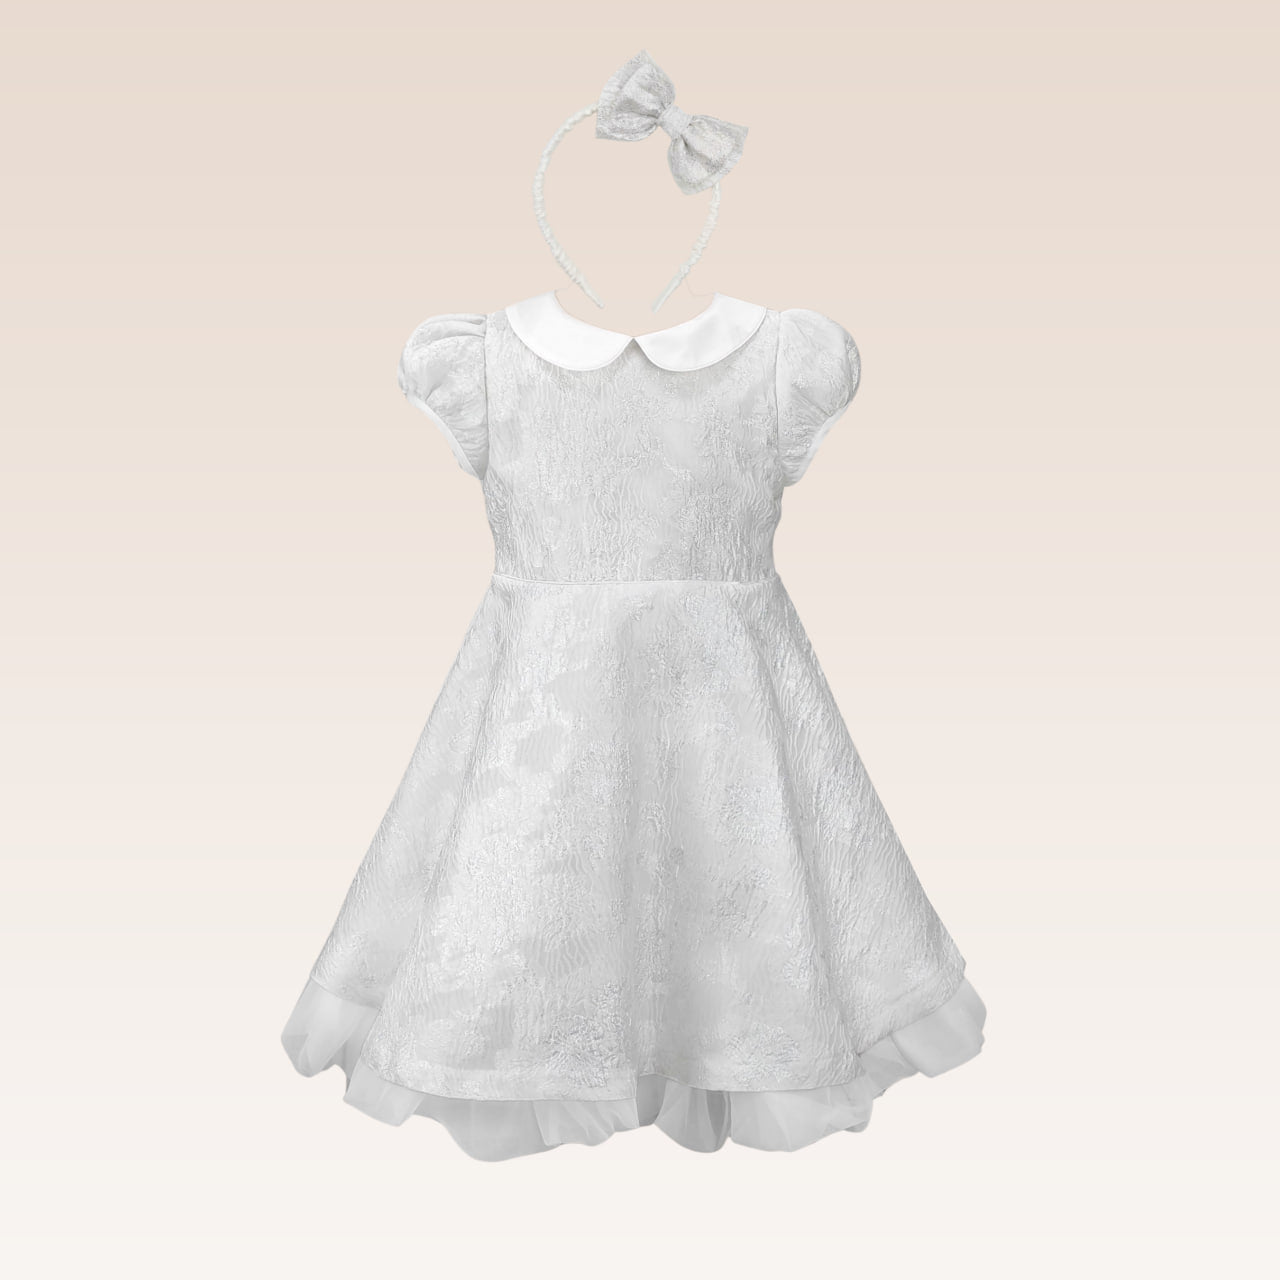 Georgette Girls Silver Jacquard Party Dress with Tulle underlay Skirt with Headband